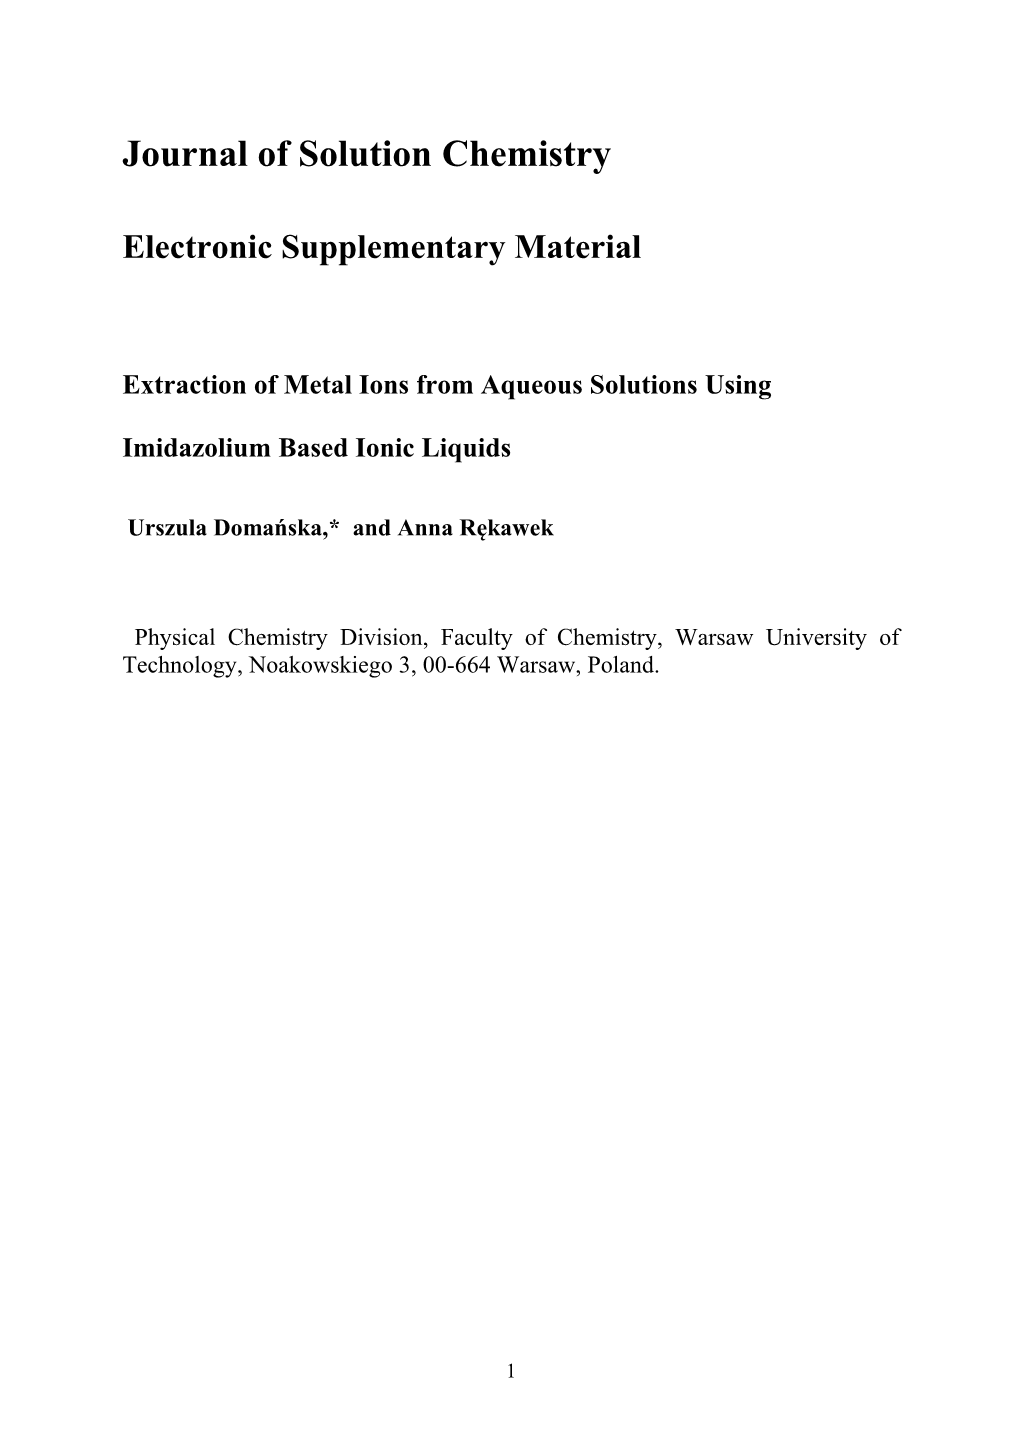 Extraction of Metal Ions from Aqueous Solutions Using Imidazolium Based Ionic Liquids